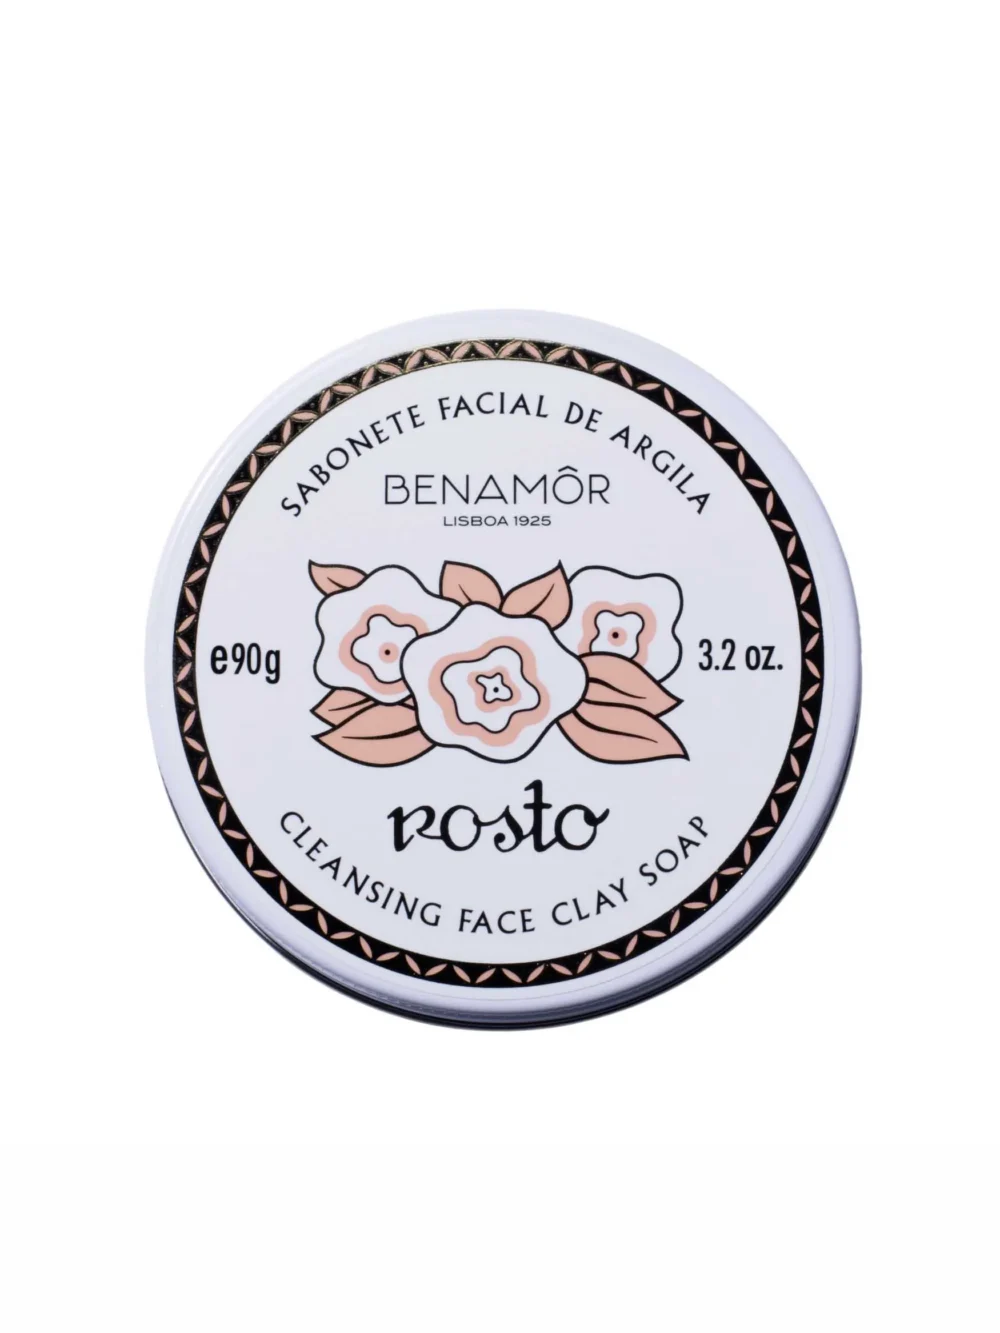 benamor cleansing face clay, ansigtssæbe